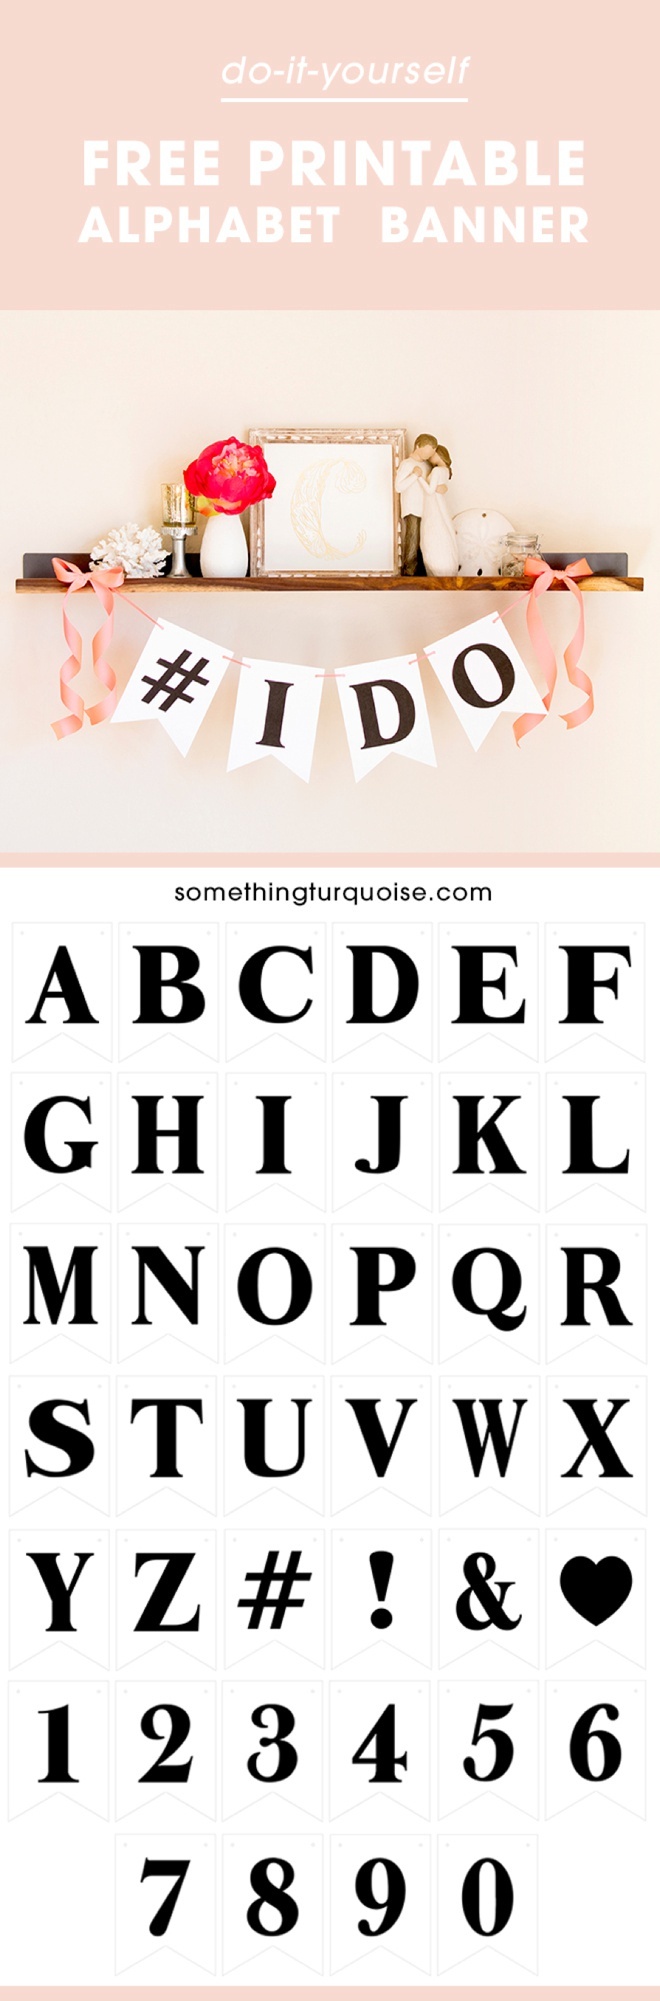 Free Printable Alphabet And Number Banner! Adorable! - Free Printable Abc Banner